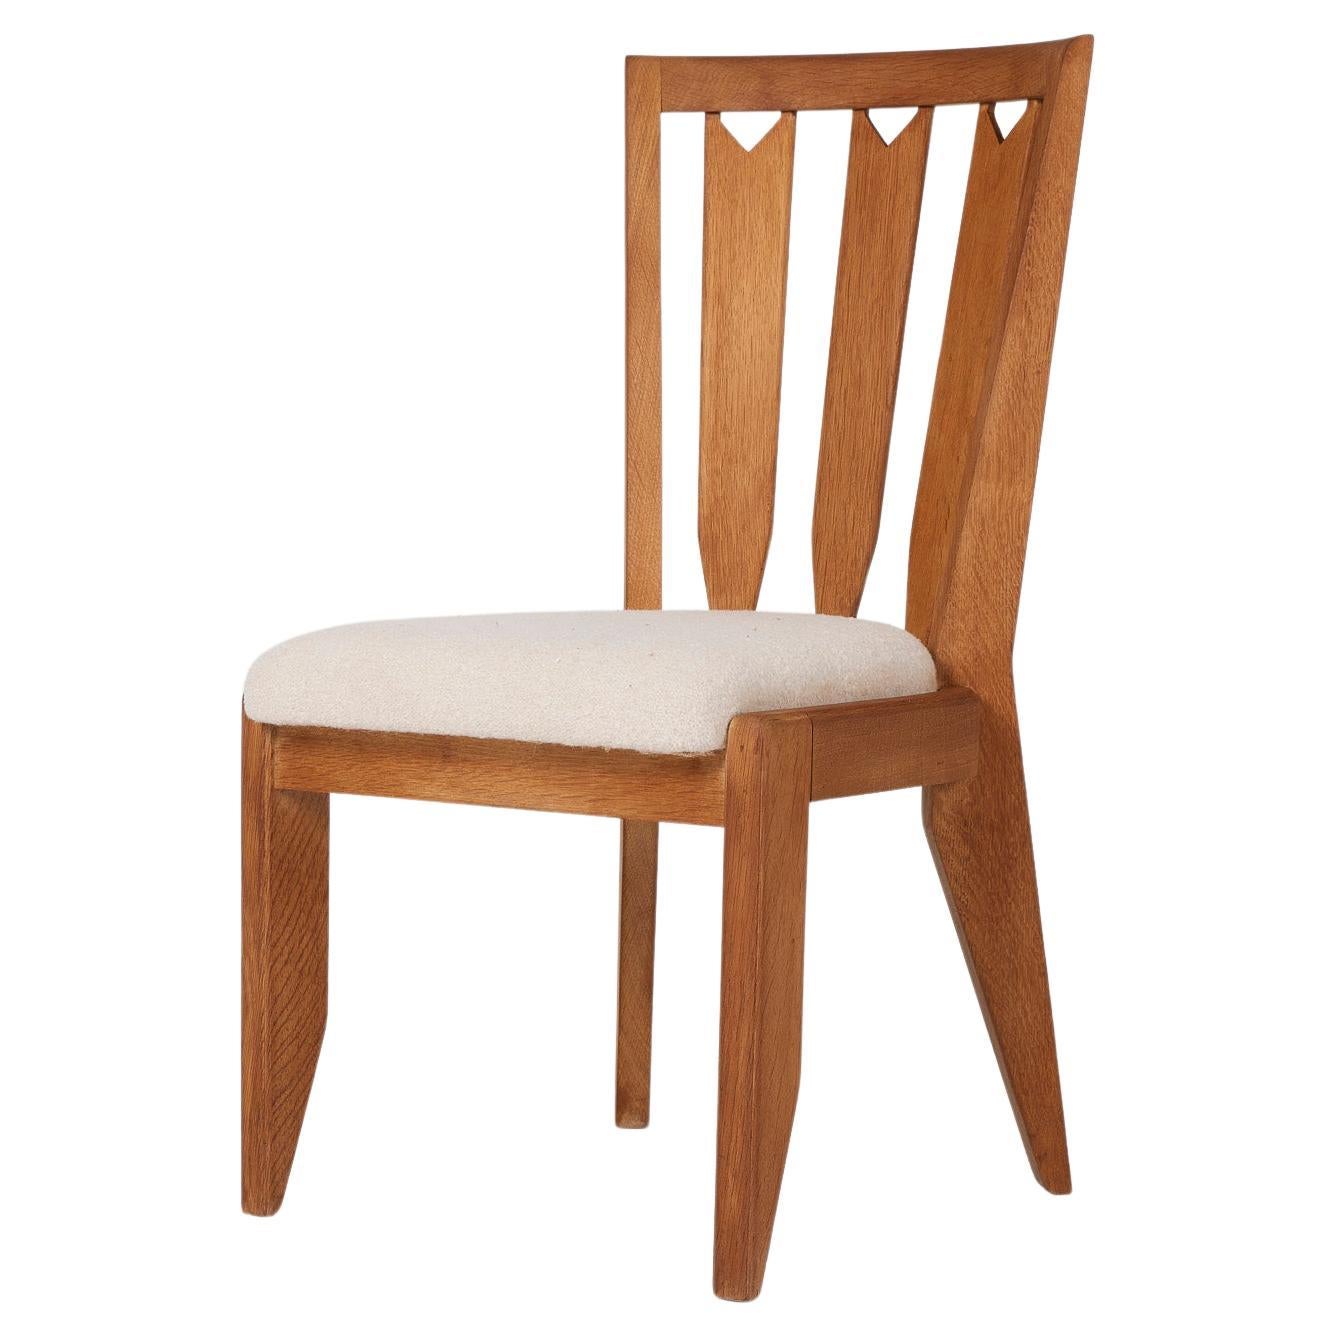 Guillerme & Chambron chair For Sale